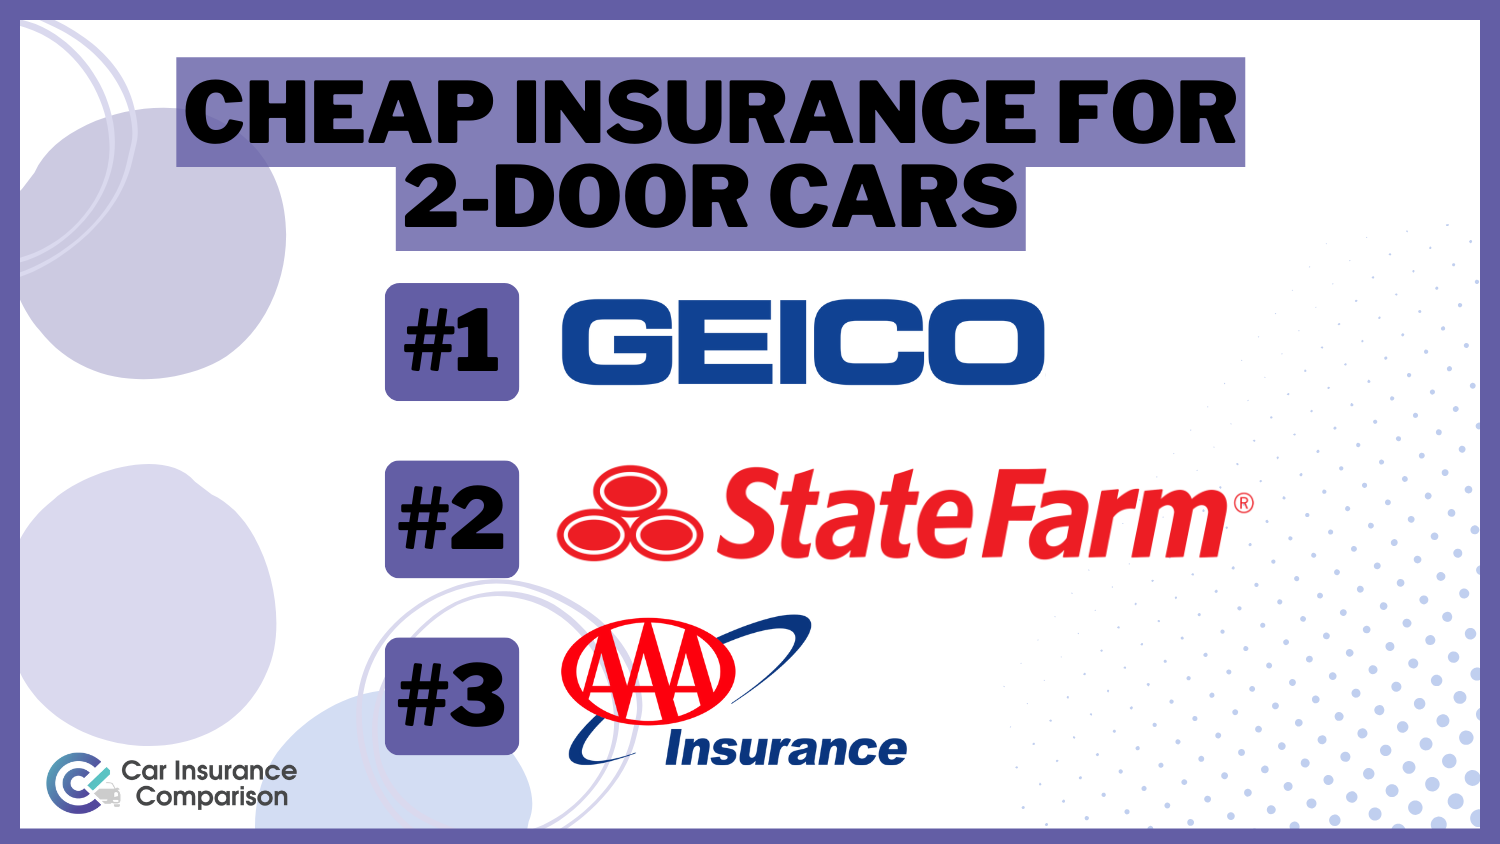 Cheap Insurance for 2-Door Cars: Geico, State Farm, AAA